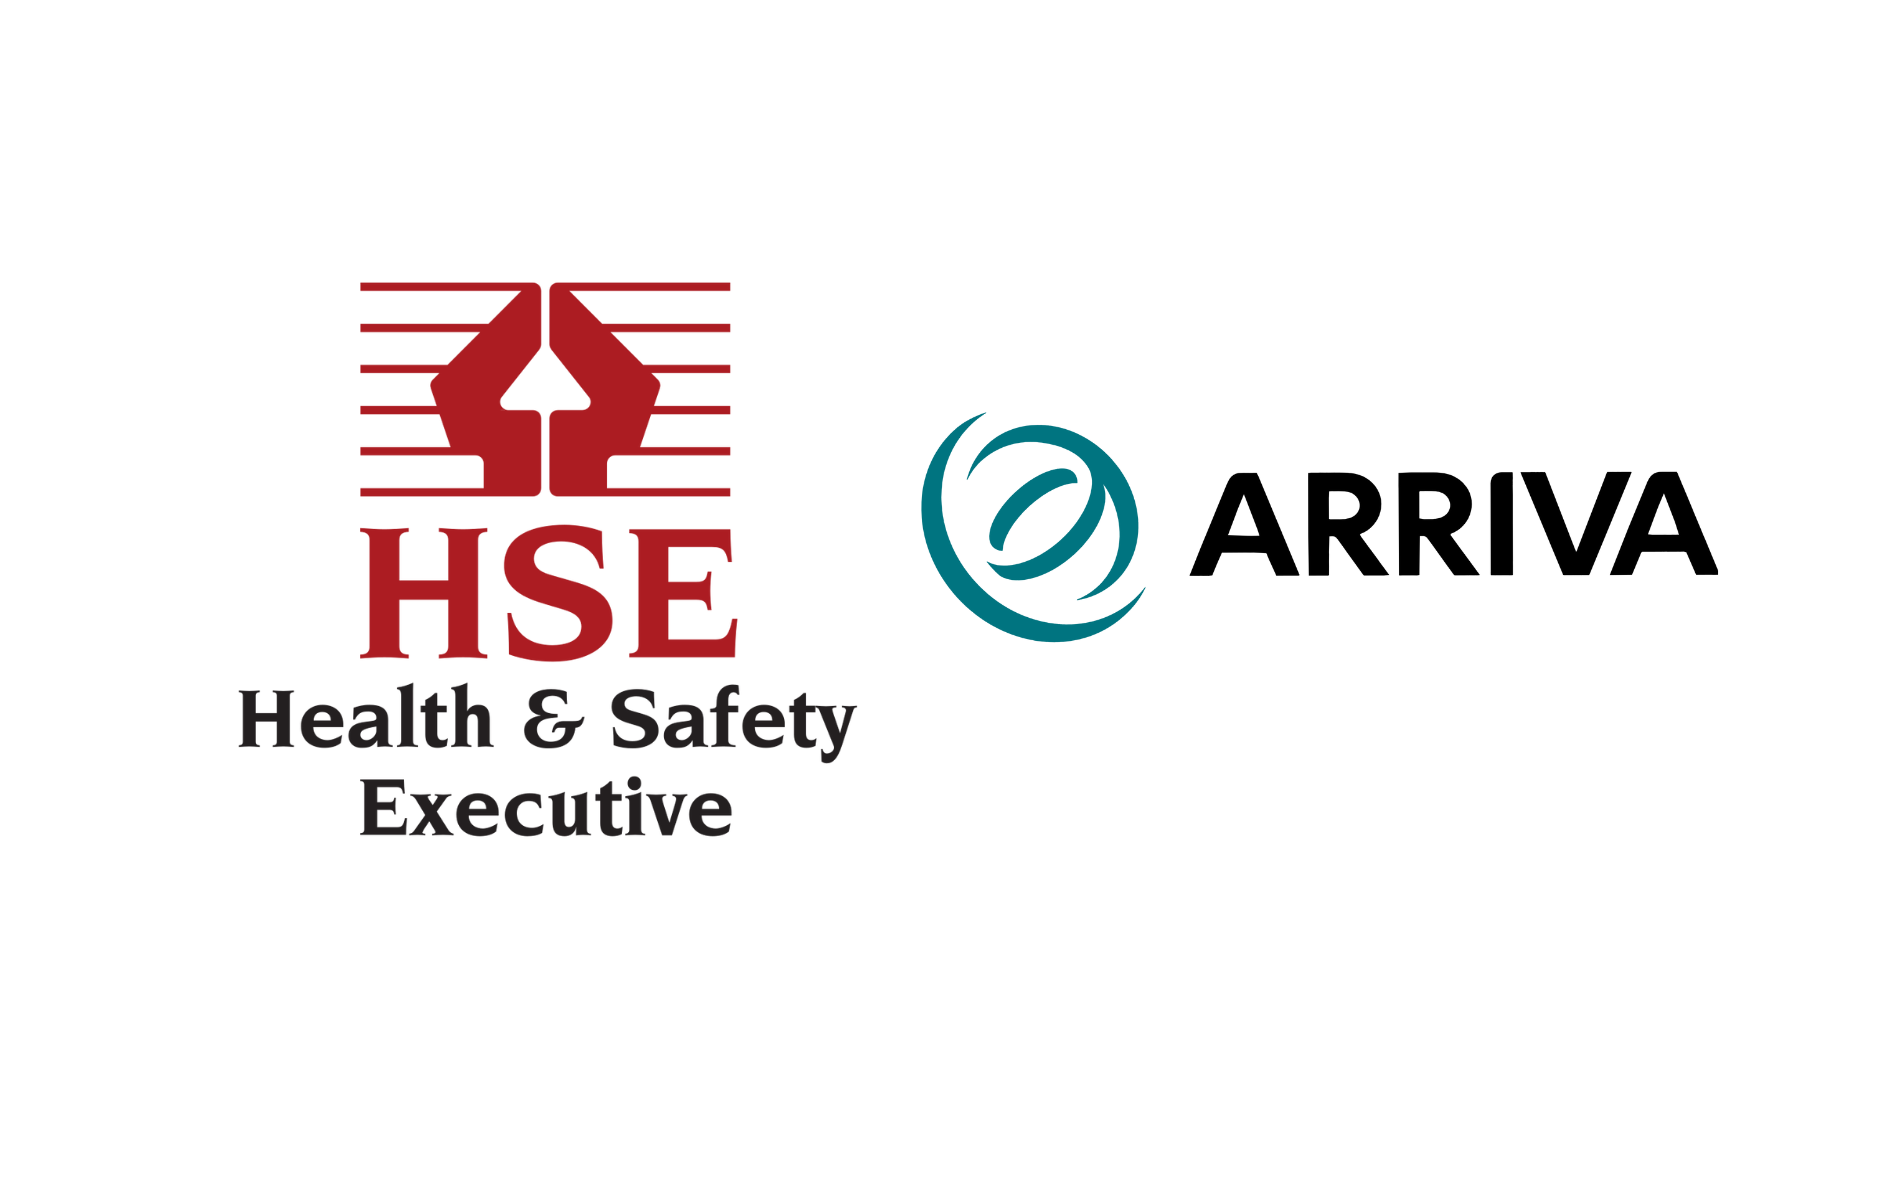 Arriva company fined after fatal reversing accident